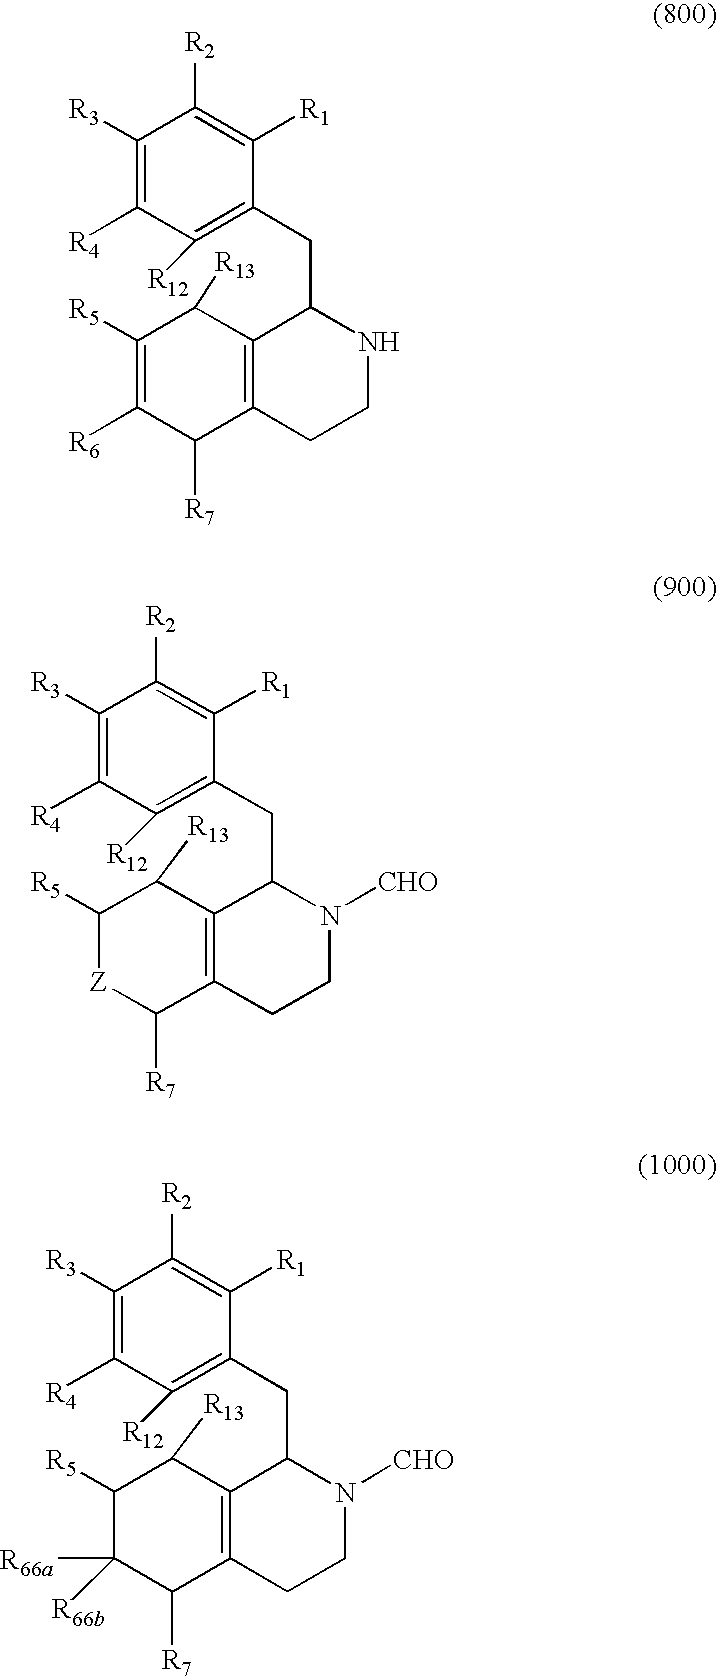 Preparation of Substituted Morphinan-6-Ones and Salts and Intermediates Thereof